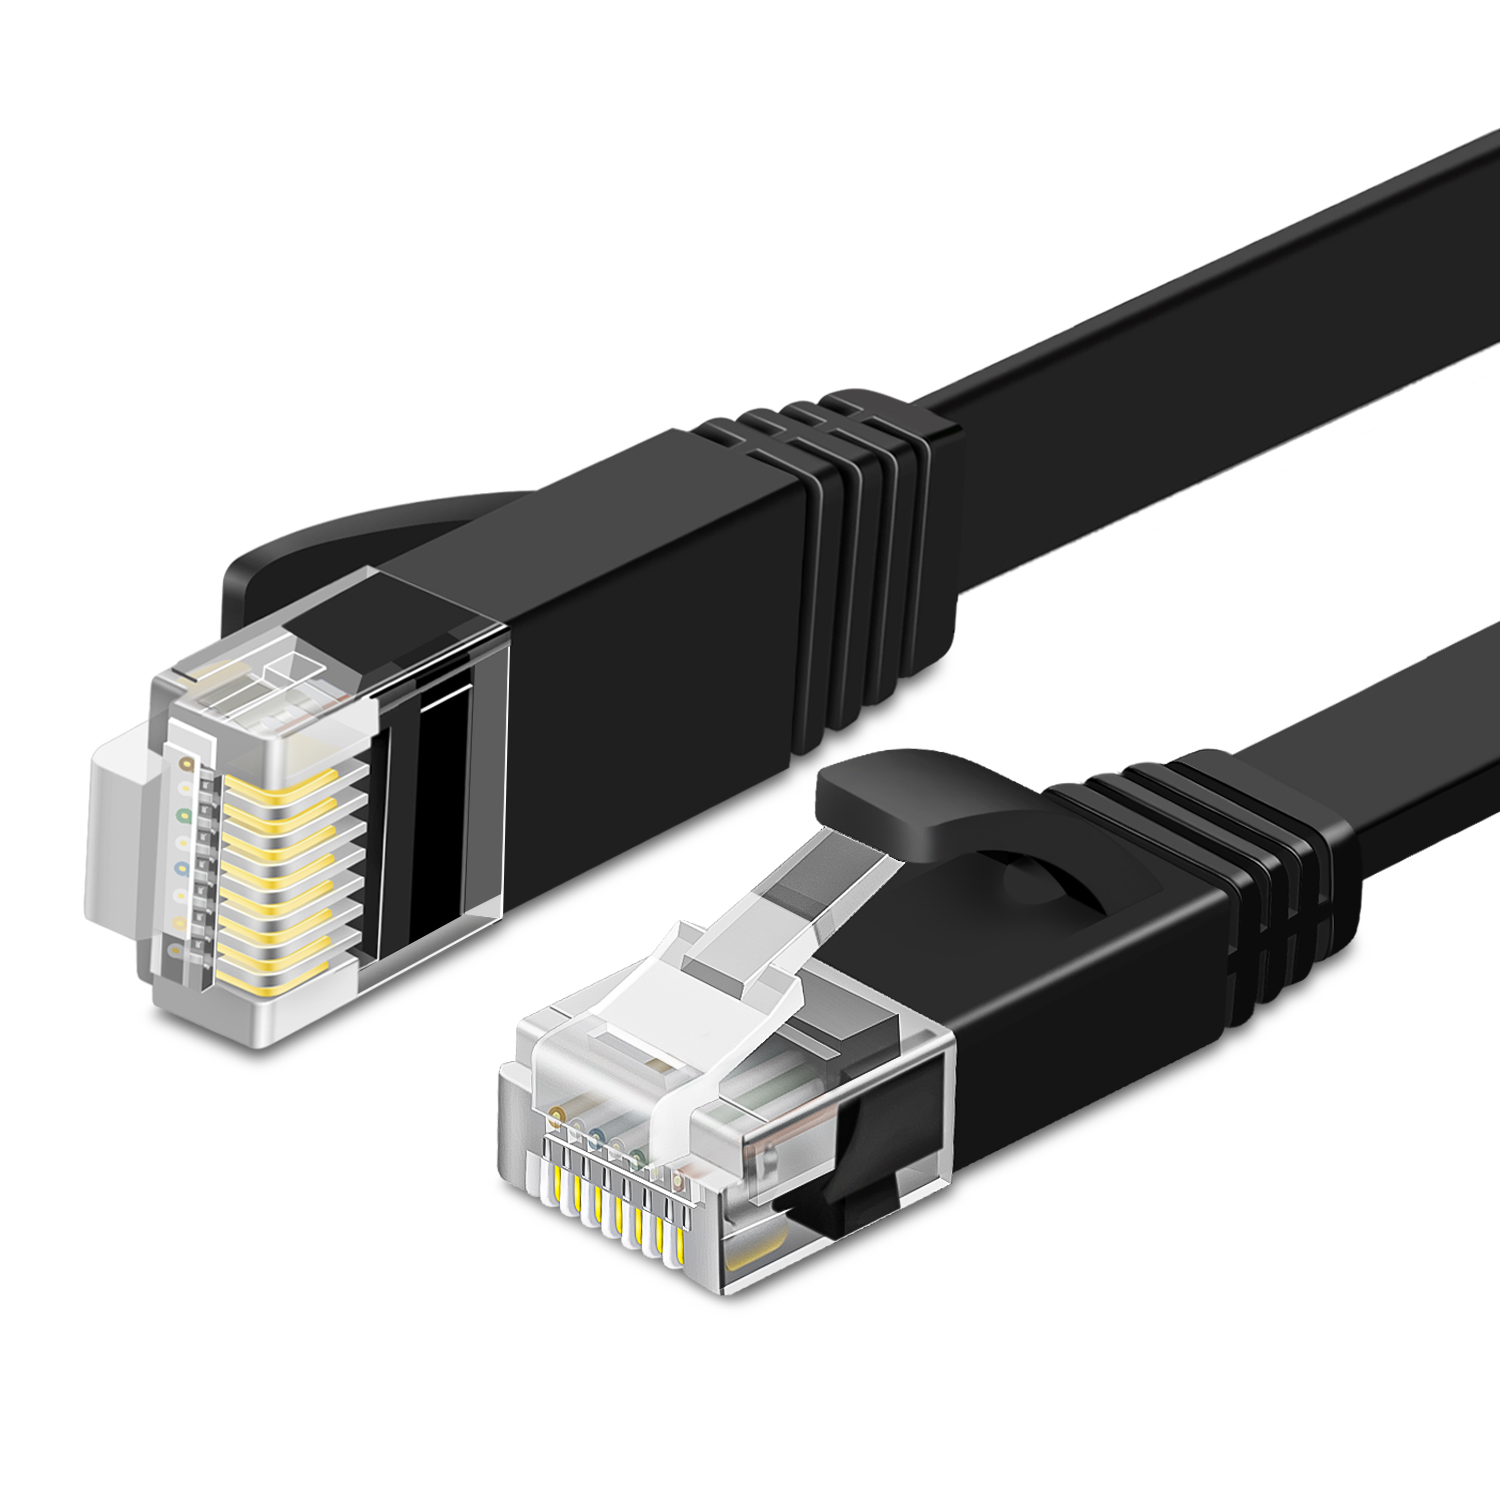 Ethernet Cable Cat 6 Flat Cable, Cat 6 Ethernet Cable 10 ft, Flat Wire Cat6 Ether Network Internet Cord - RJ45 Cable LAN Internet Ethernet Patch Cables Connector (Black)